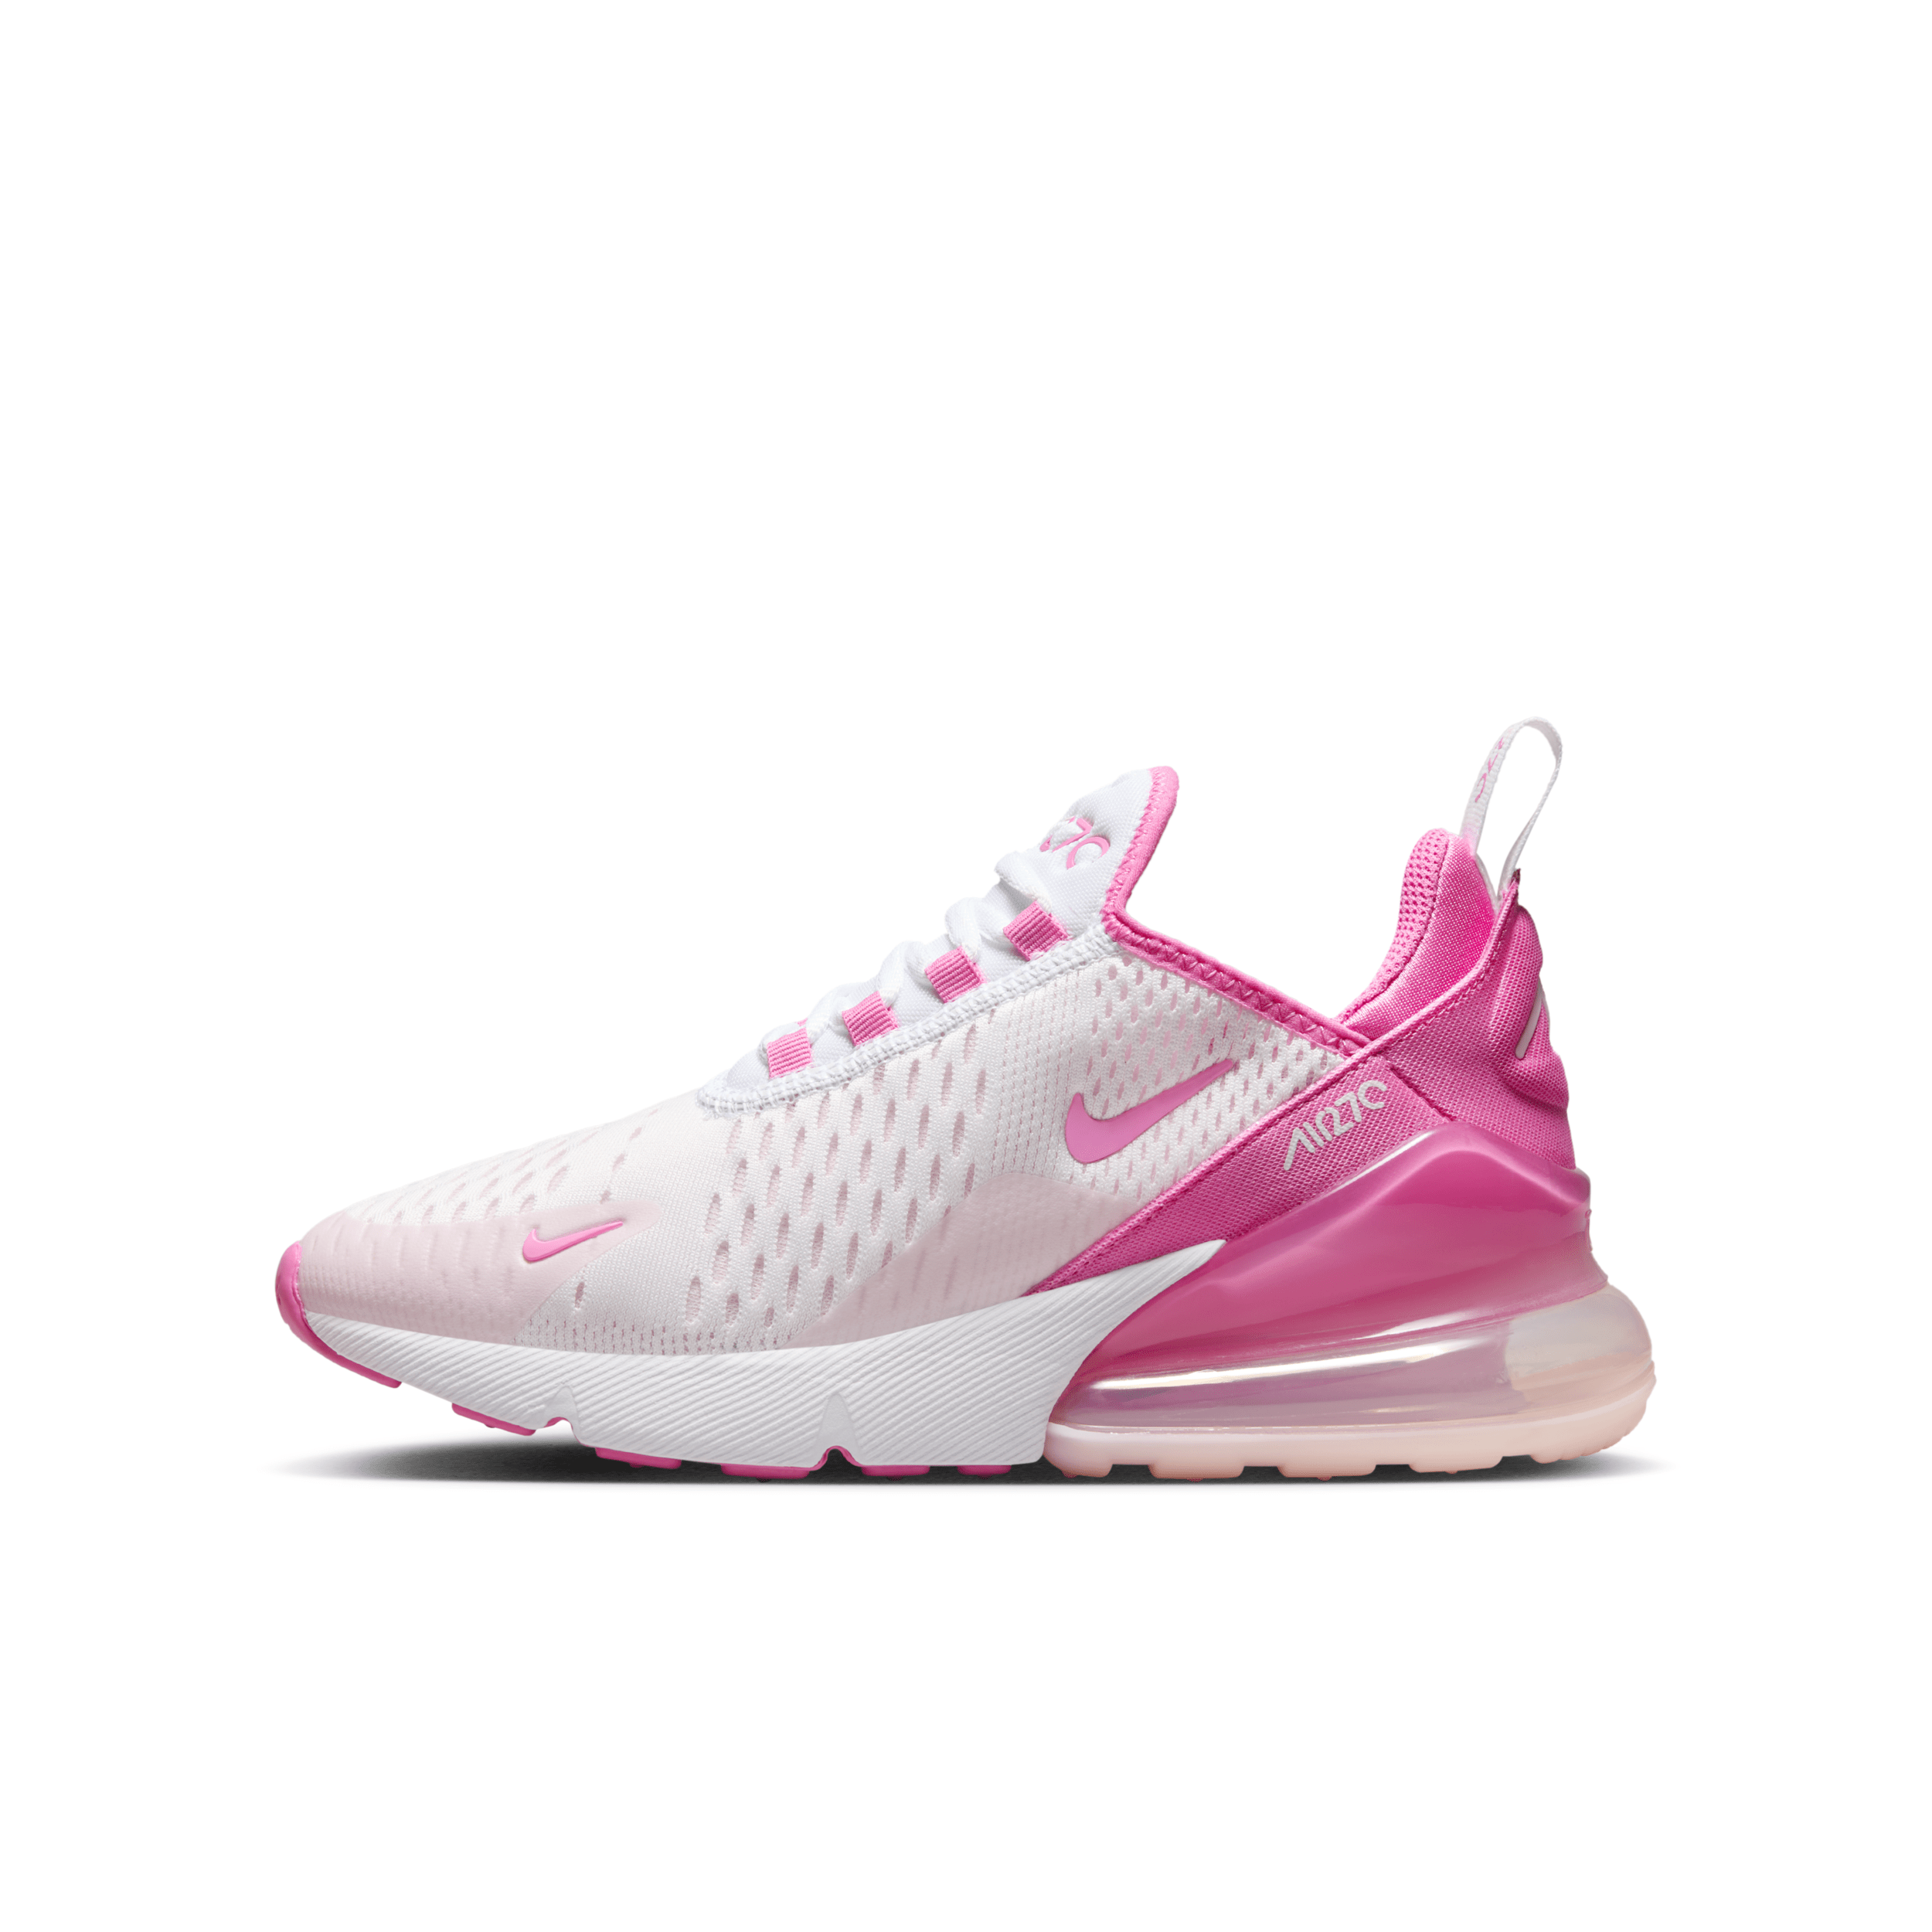 Nike Air Max 270 Big Kids' Shoes In White